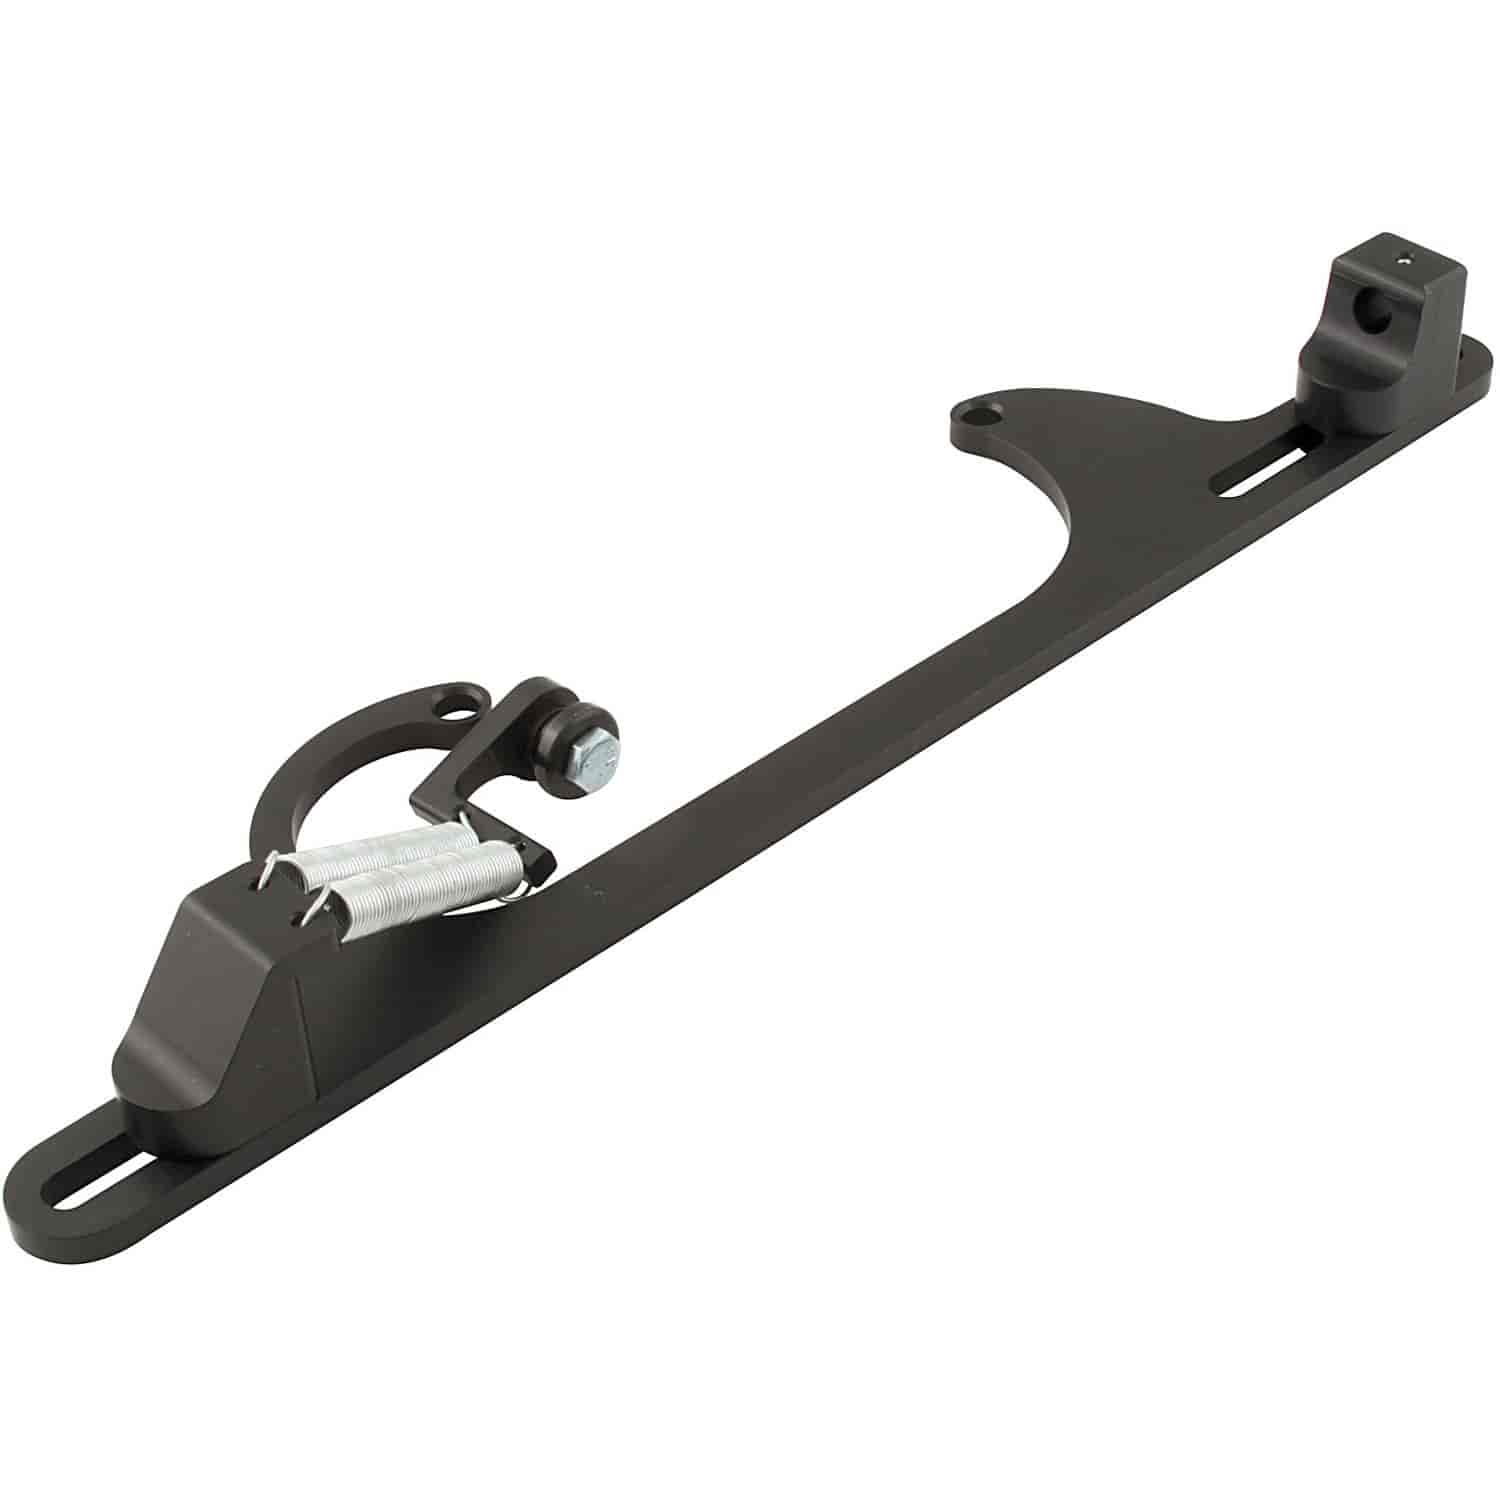 Adjustable Throttle Bracket With Return Springs 4150 Morse Cable